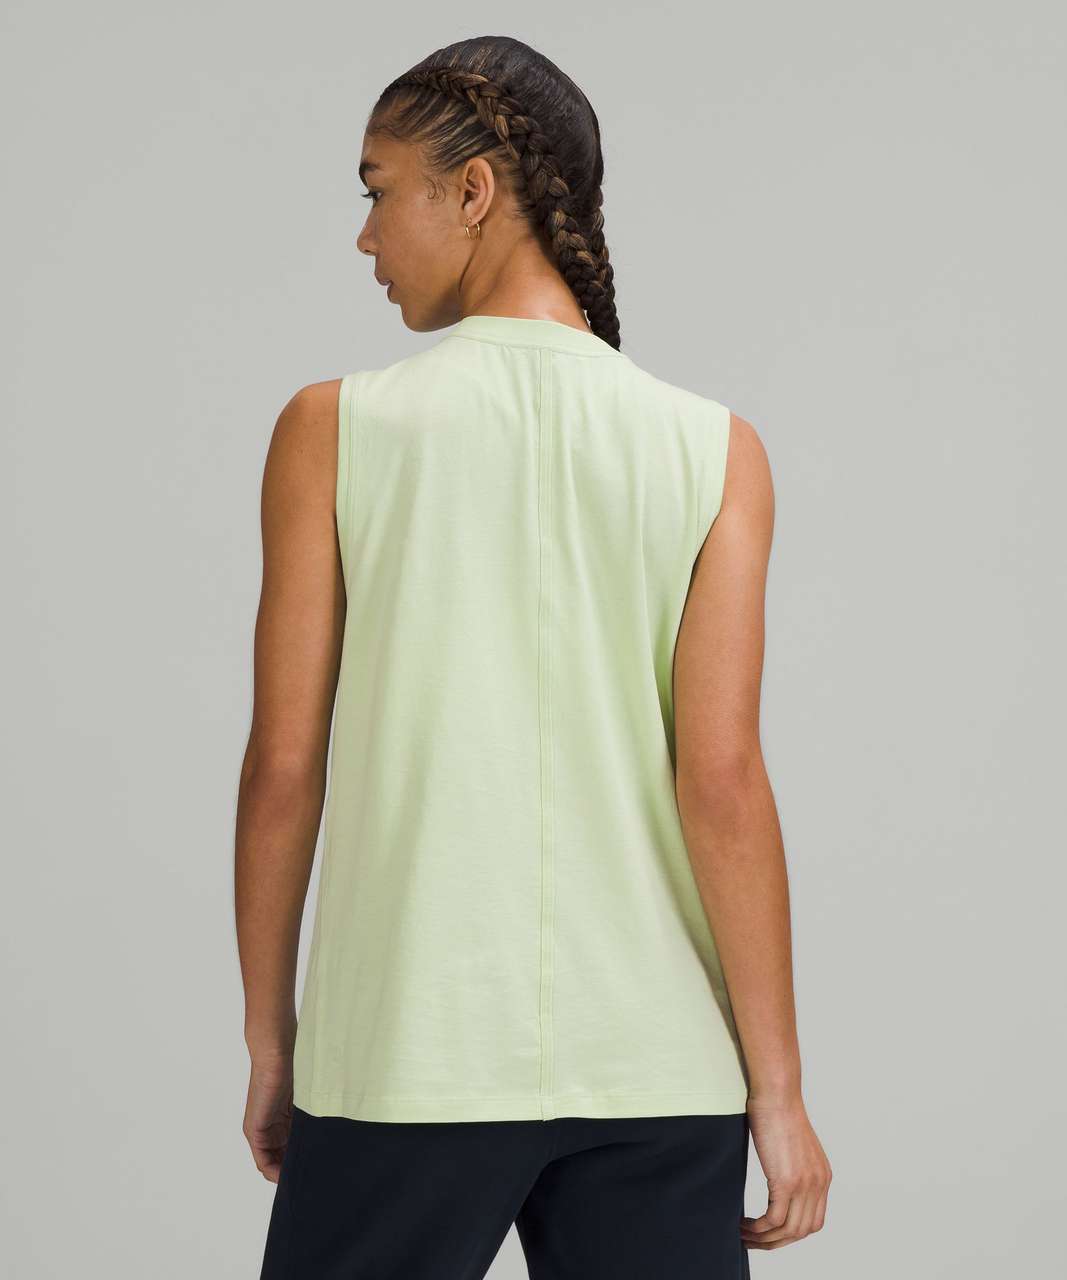 Lululemon All Yours Tank Top - Creamy Mint